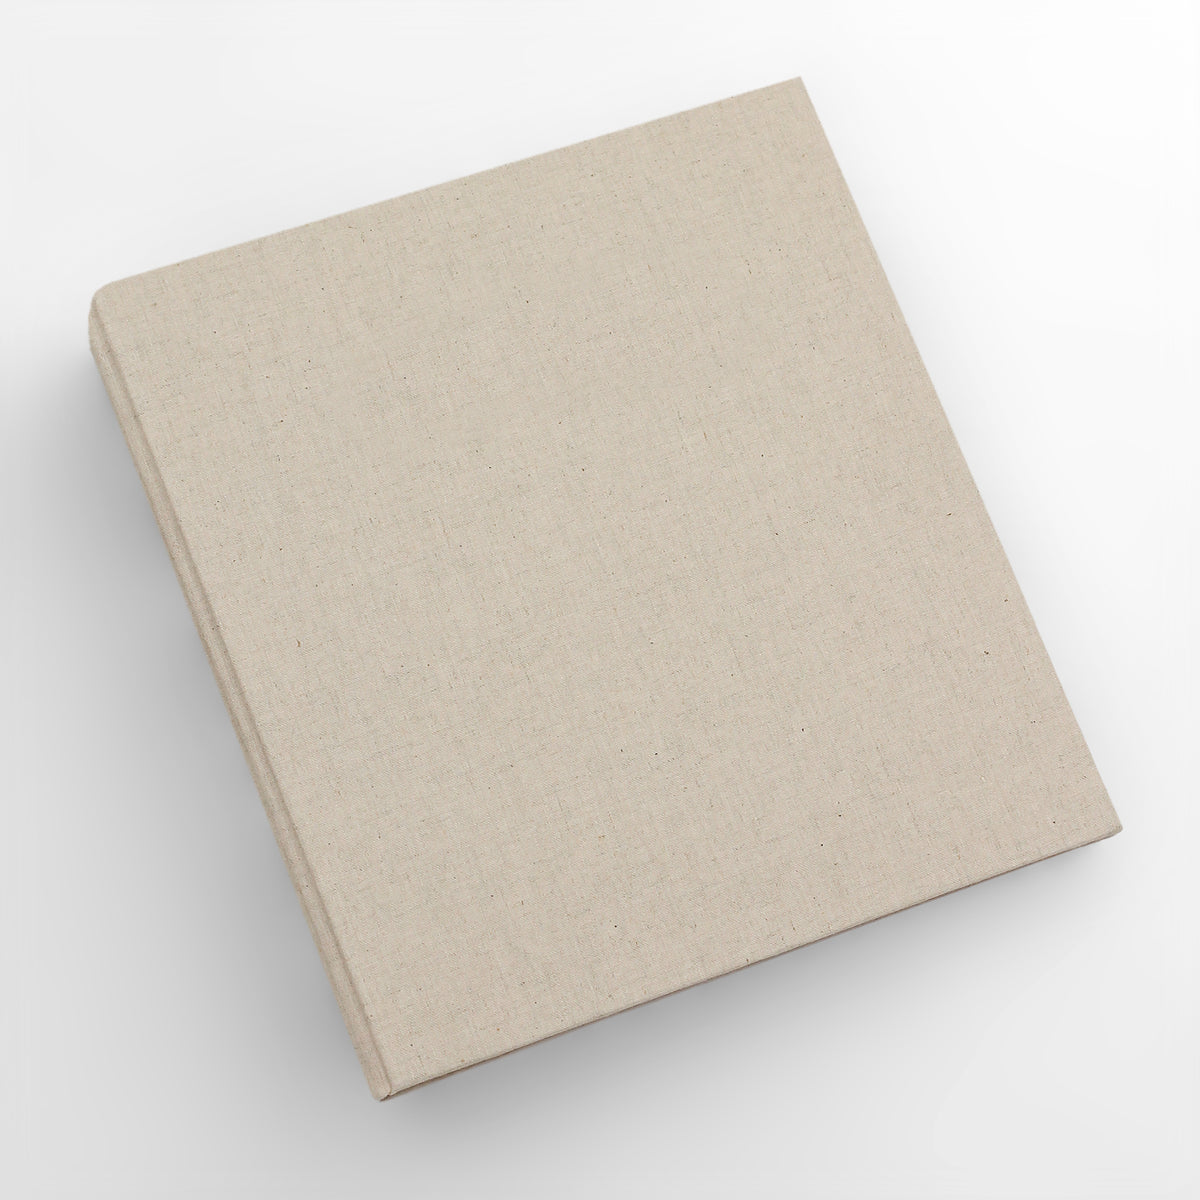 Photo Binder for 5x7 photos | Cover: Natural Linen | Available Personalized